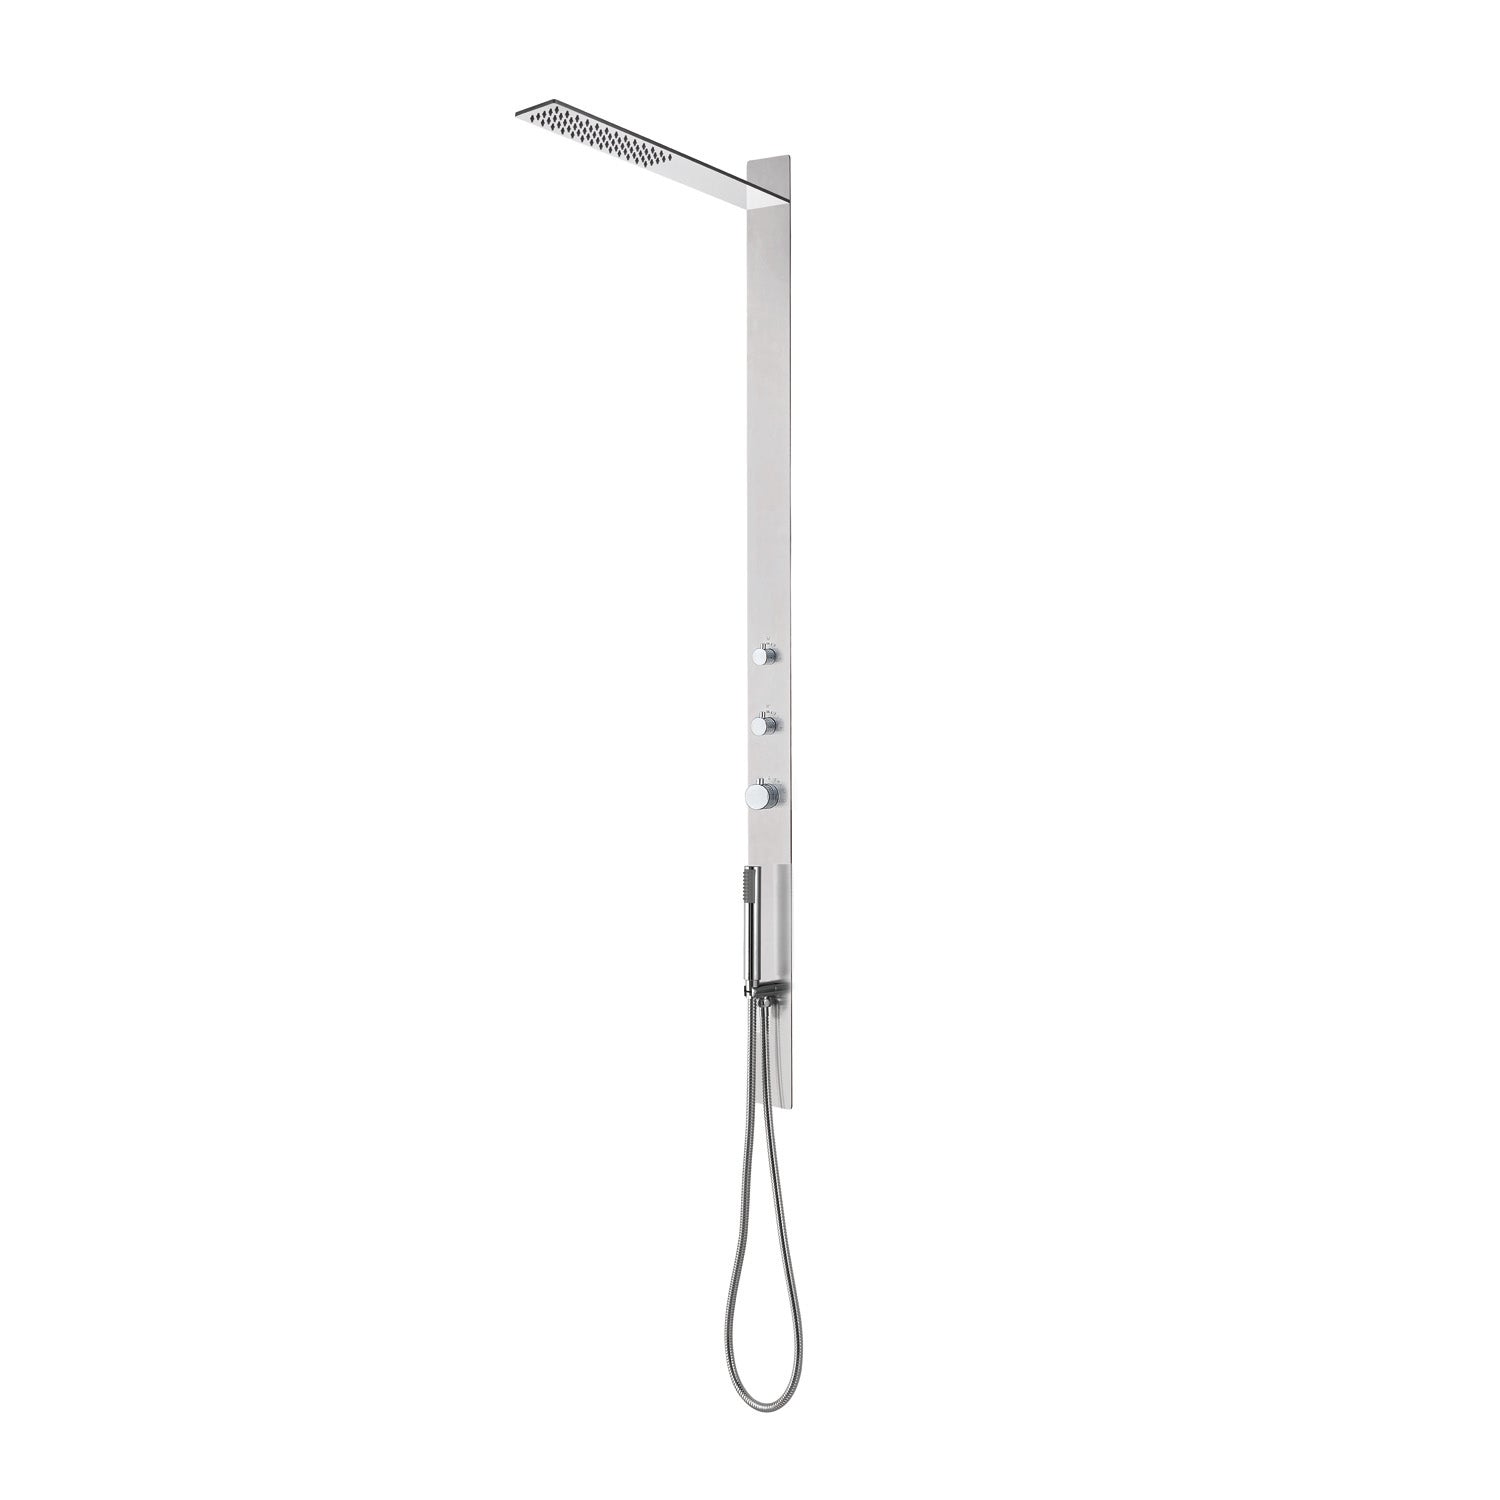 DAX Stainless Steel Shower Panel With Hand Shower Thermostatic Mixer Chrome Finish (DAX-039)